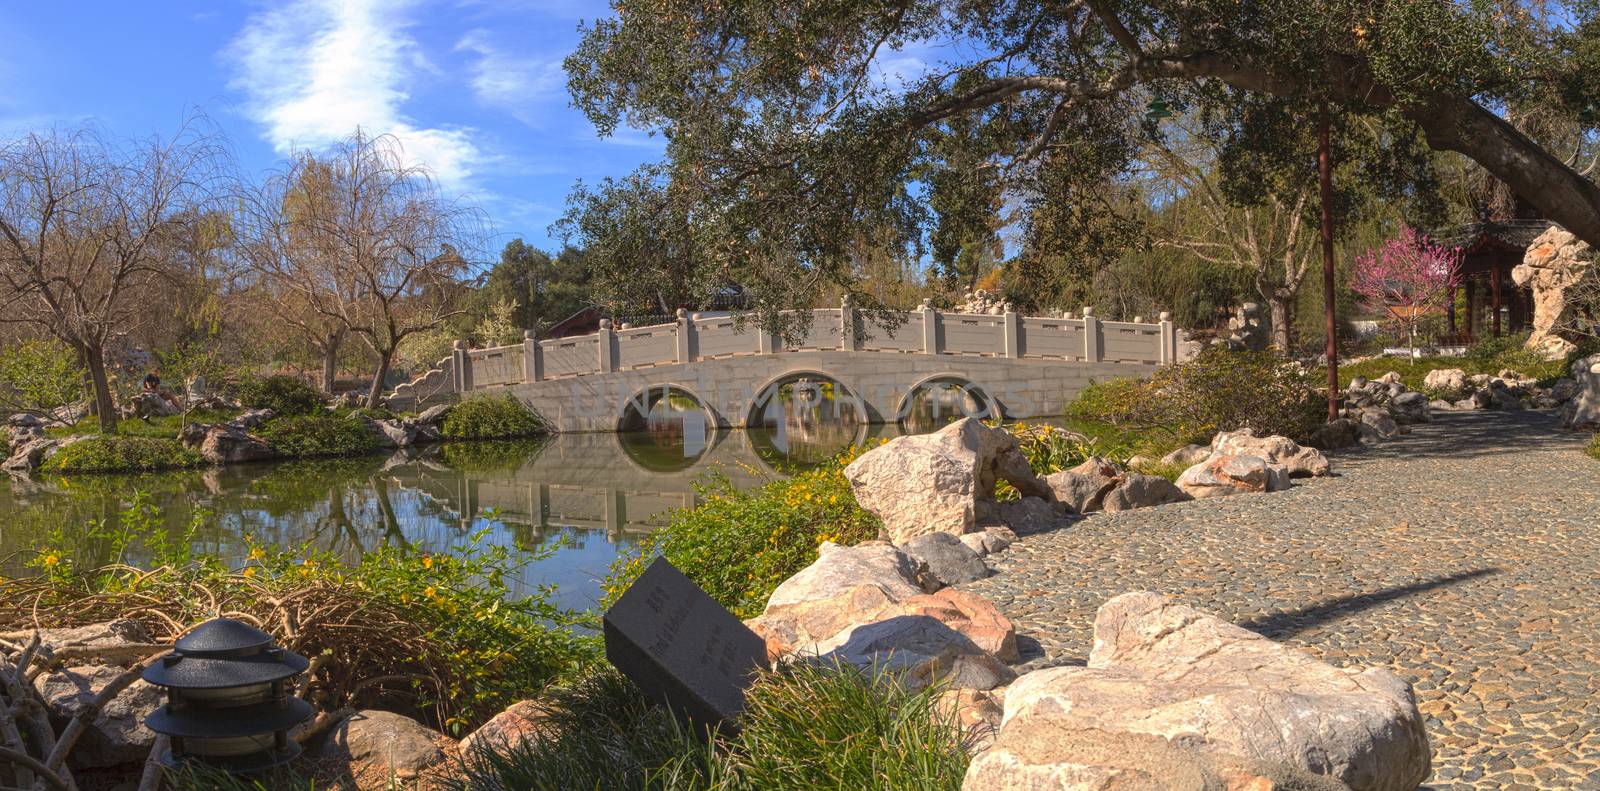 Chinese garden at the Huntington Botanical Garden and Library in Los Angeles